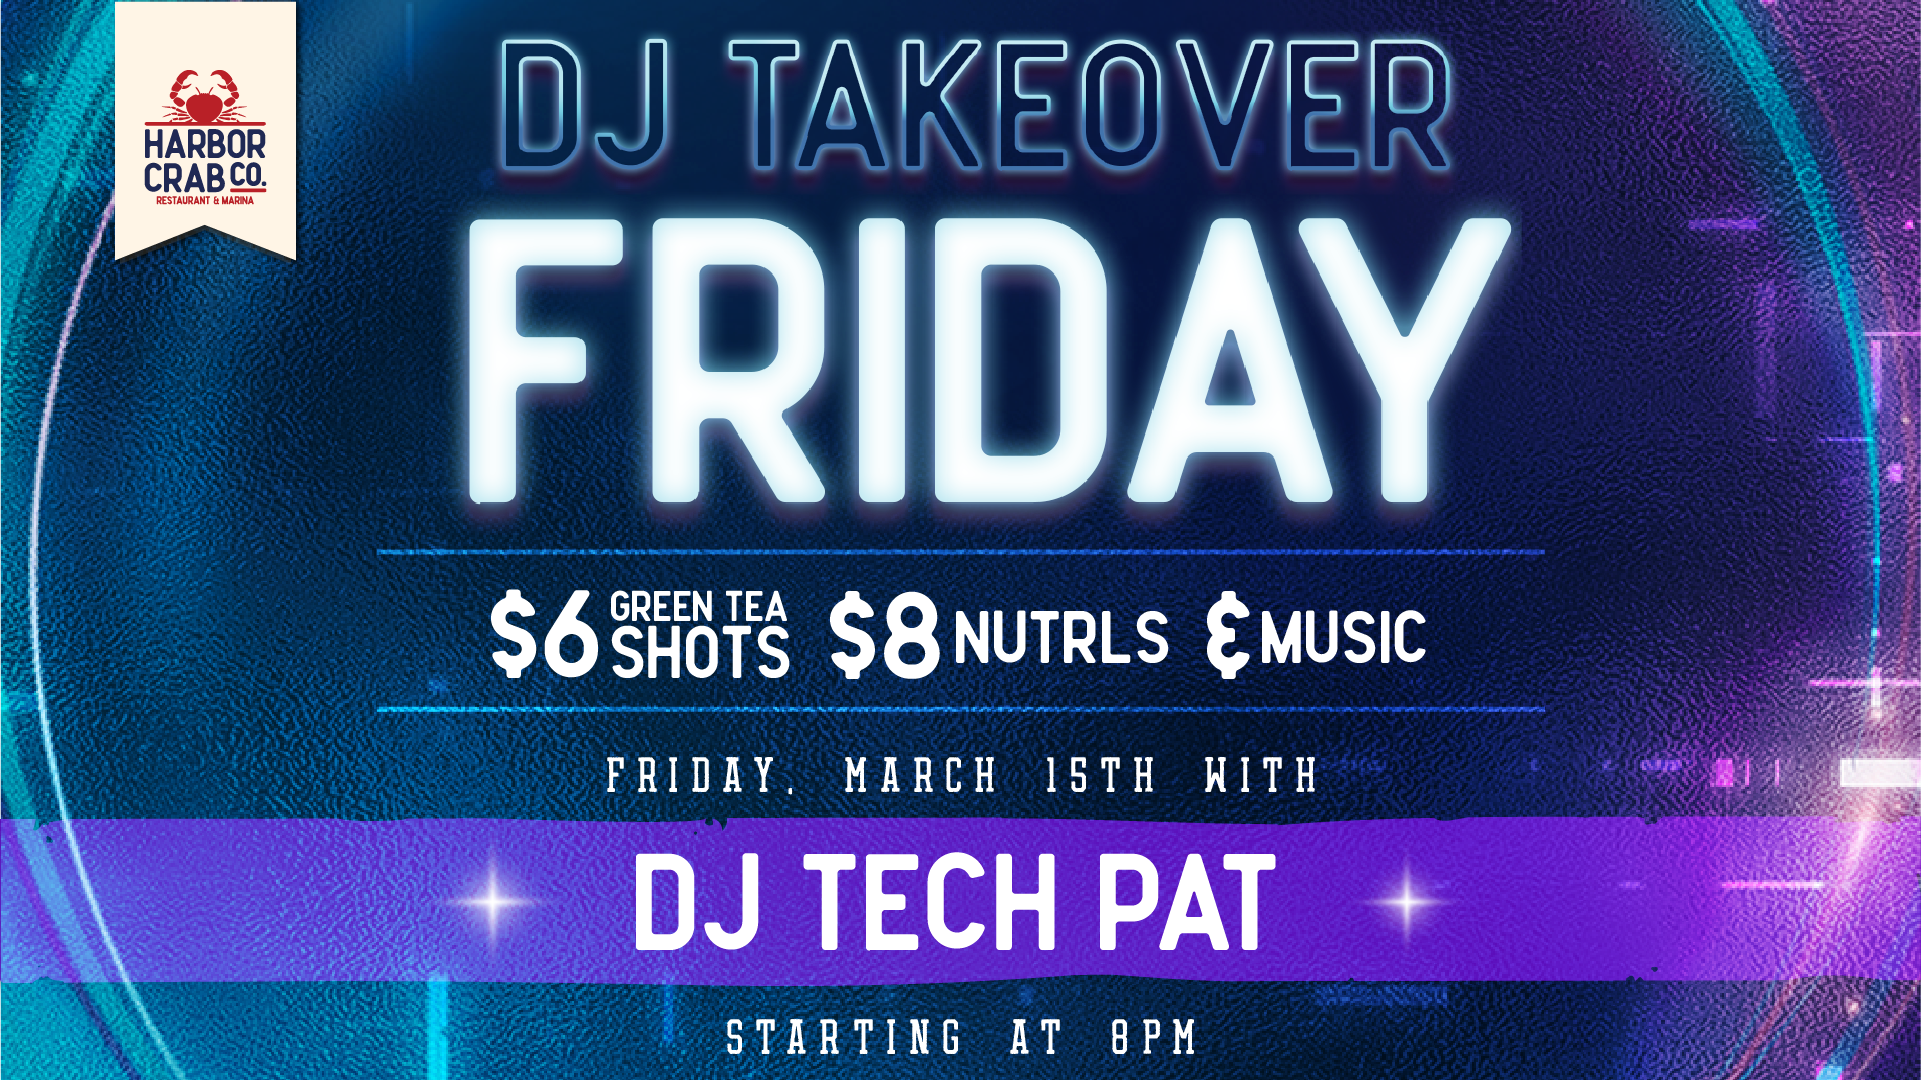 Flyer for DJ Tech Pat's takeover at Harbor Crab on Friday, March 15th at 8 PM with drink deals